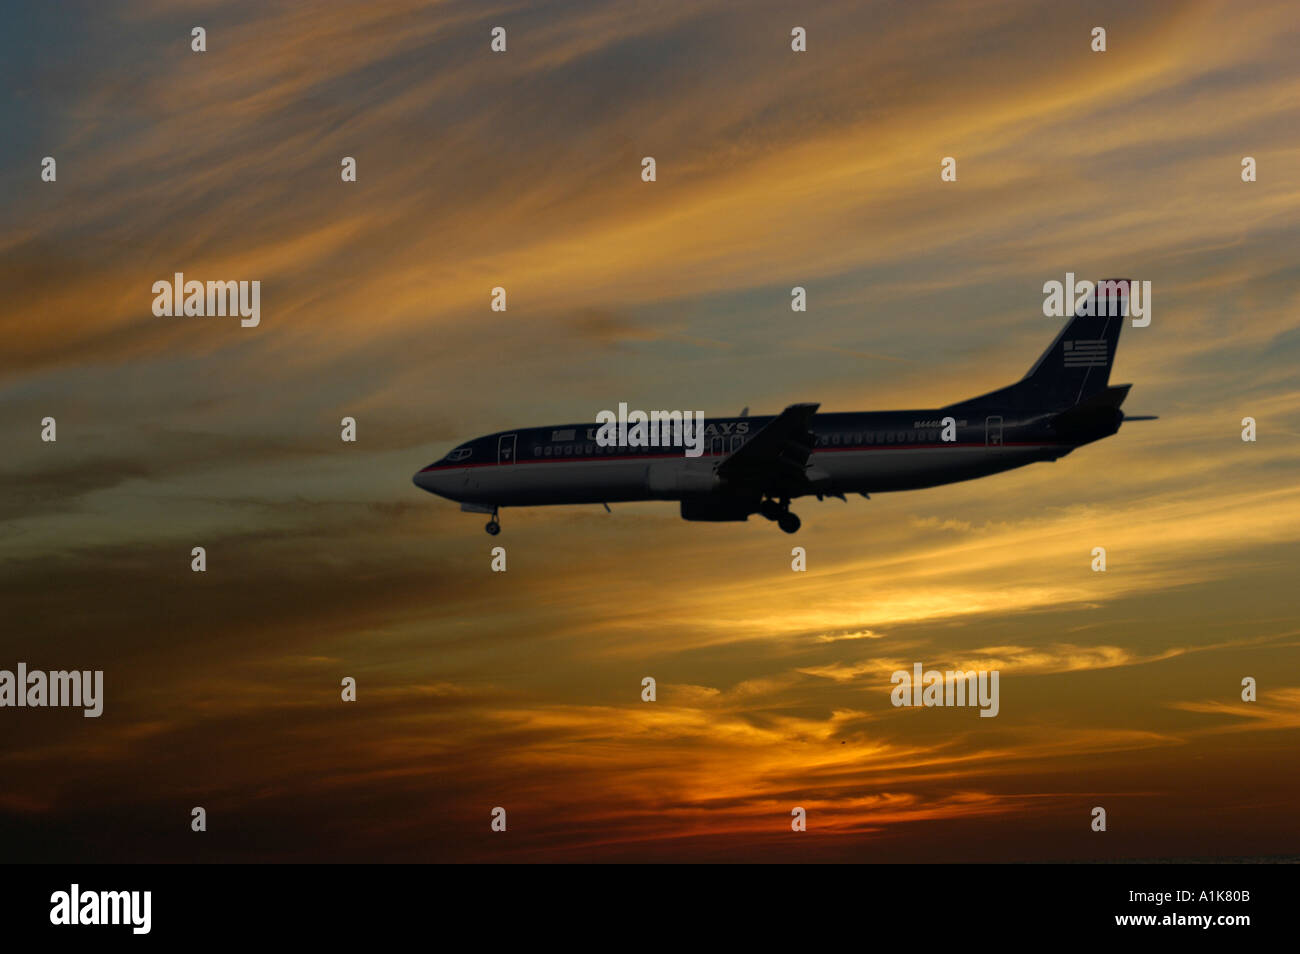 Silhouette of air plane into a setting sun in the evening as it prepares to land Stock Photo